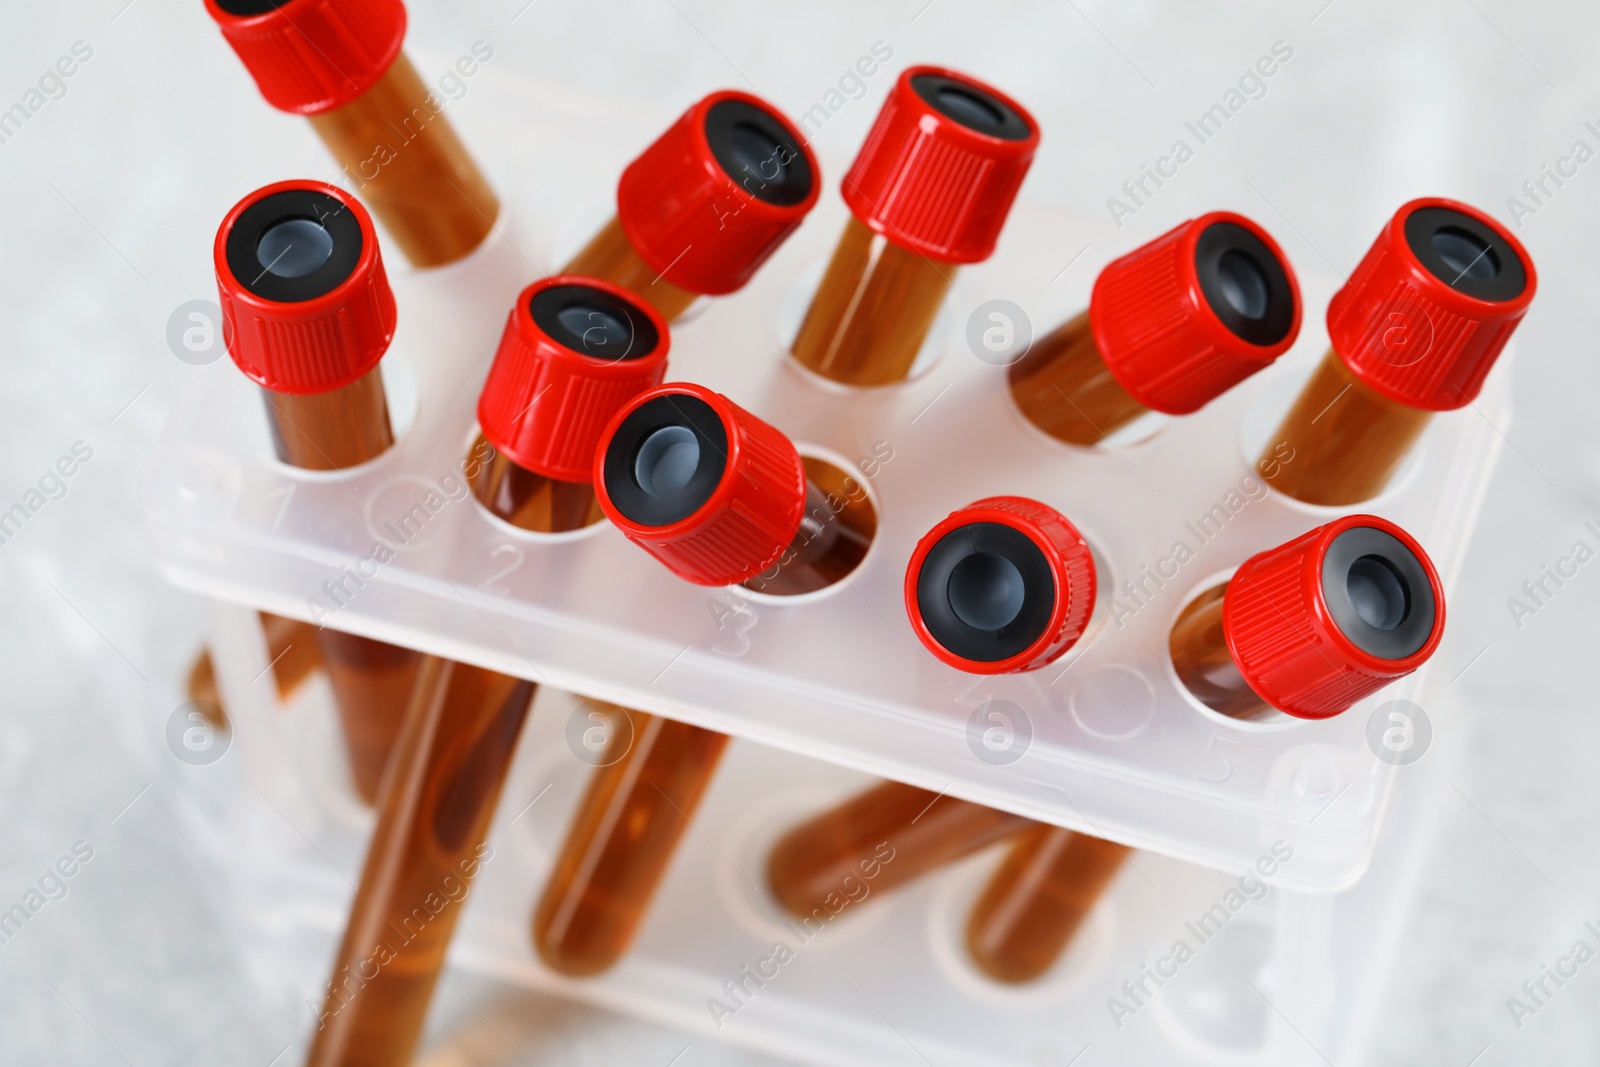 Photo of Test tubes with brown liquid in stand, closeup